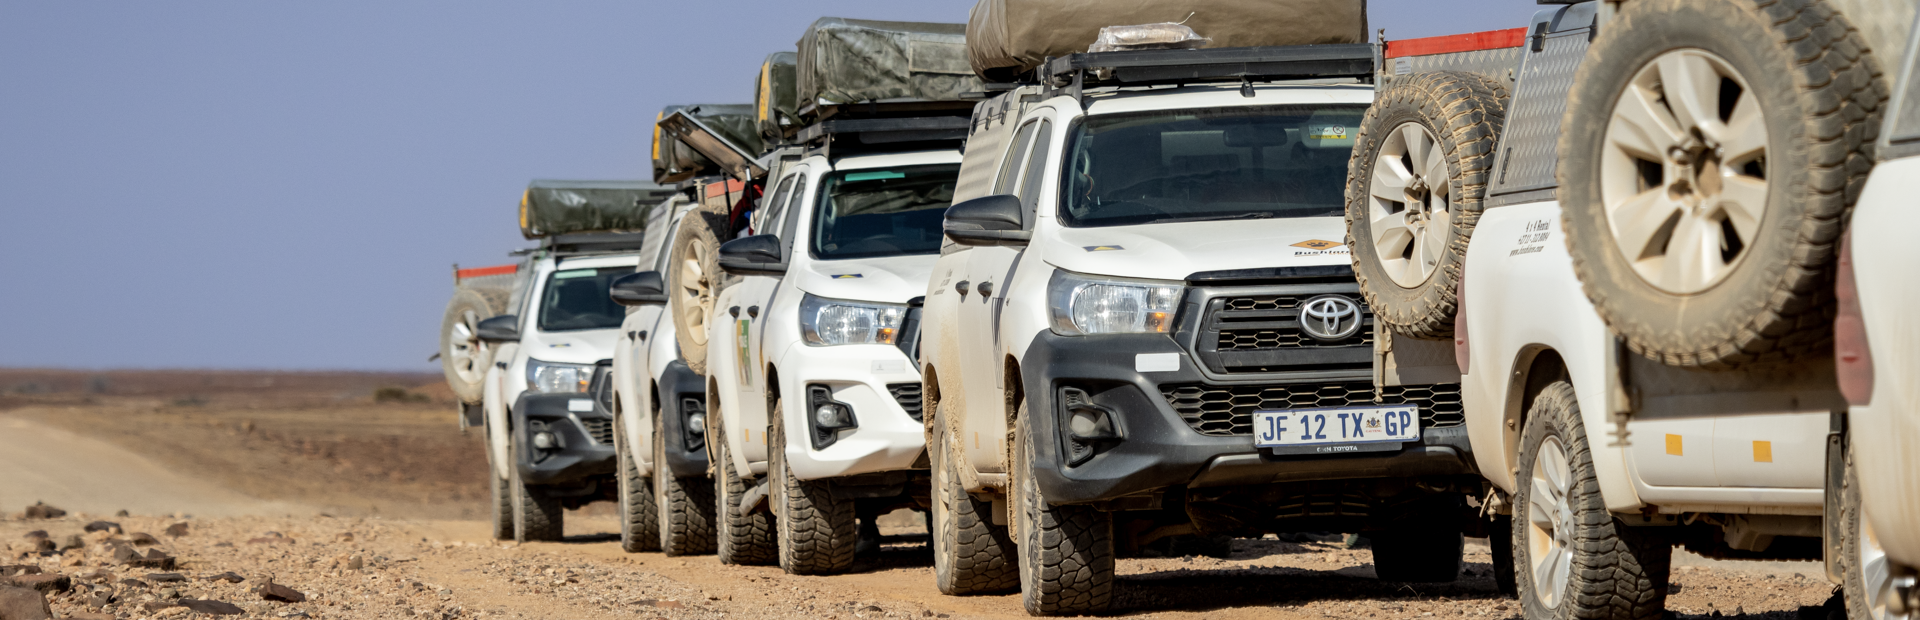 a row of toyota hilux trucks are parked on a dirt road